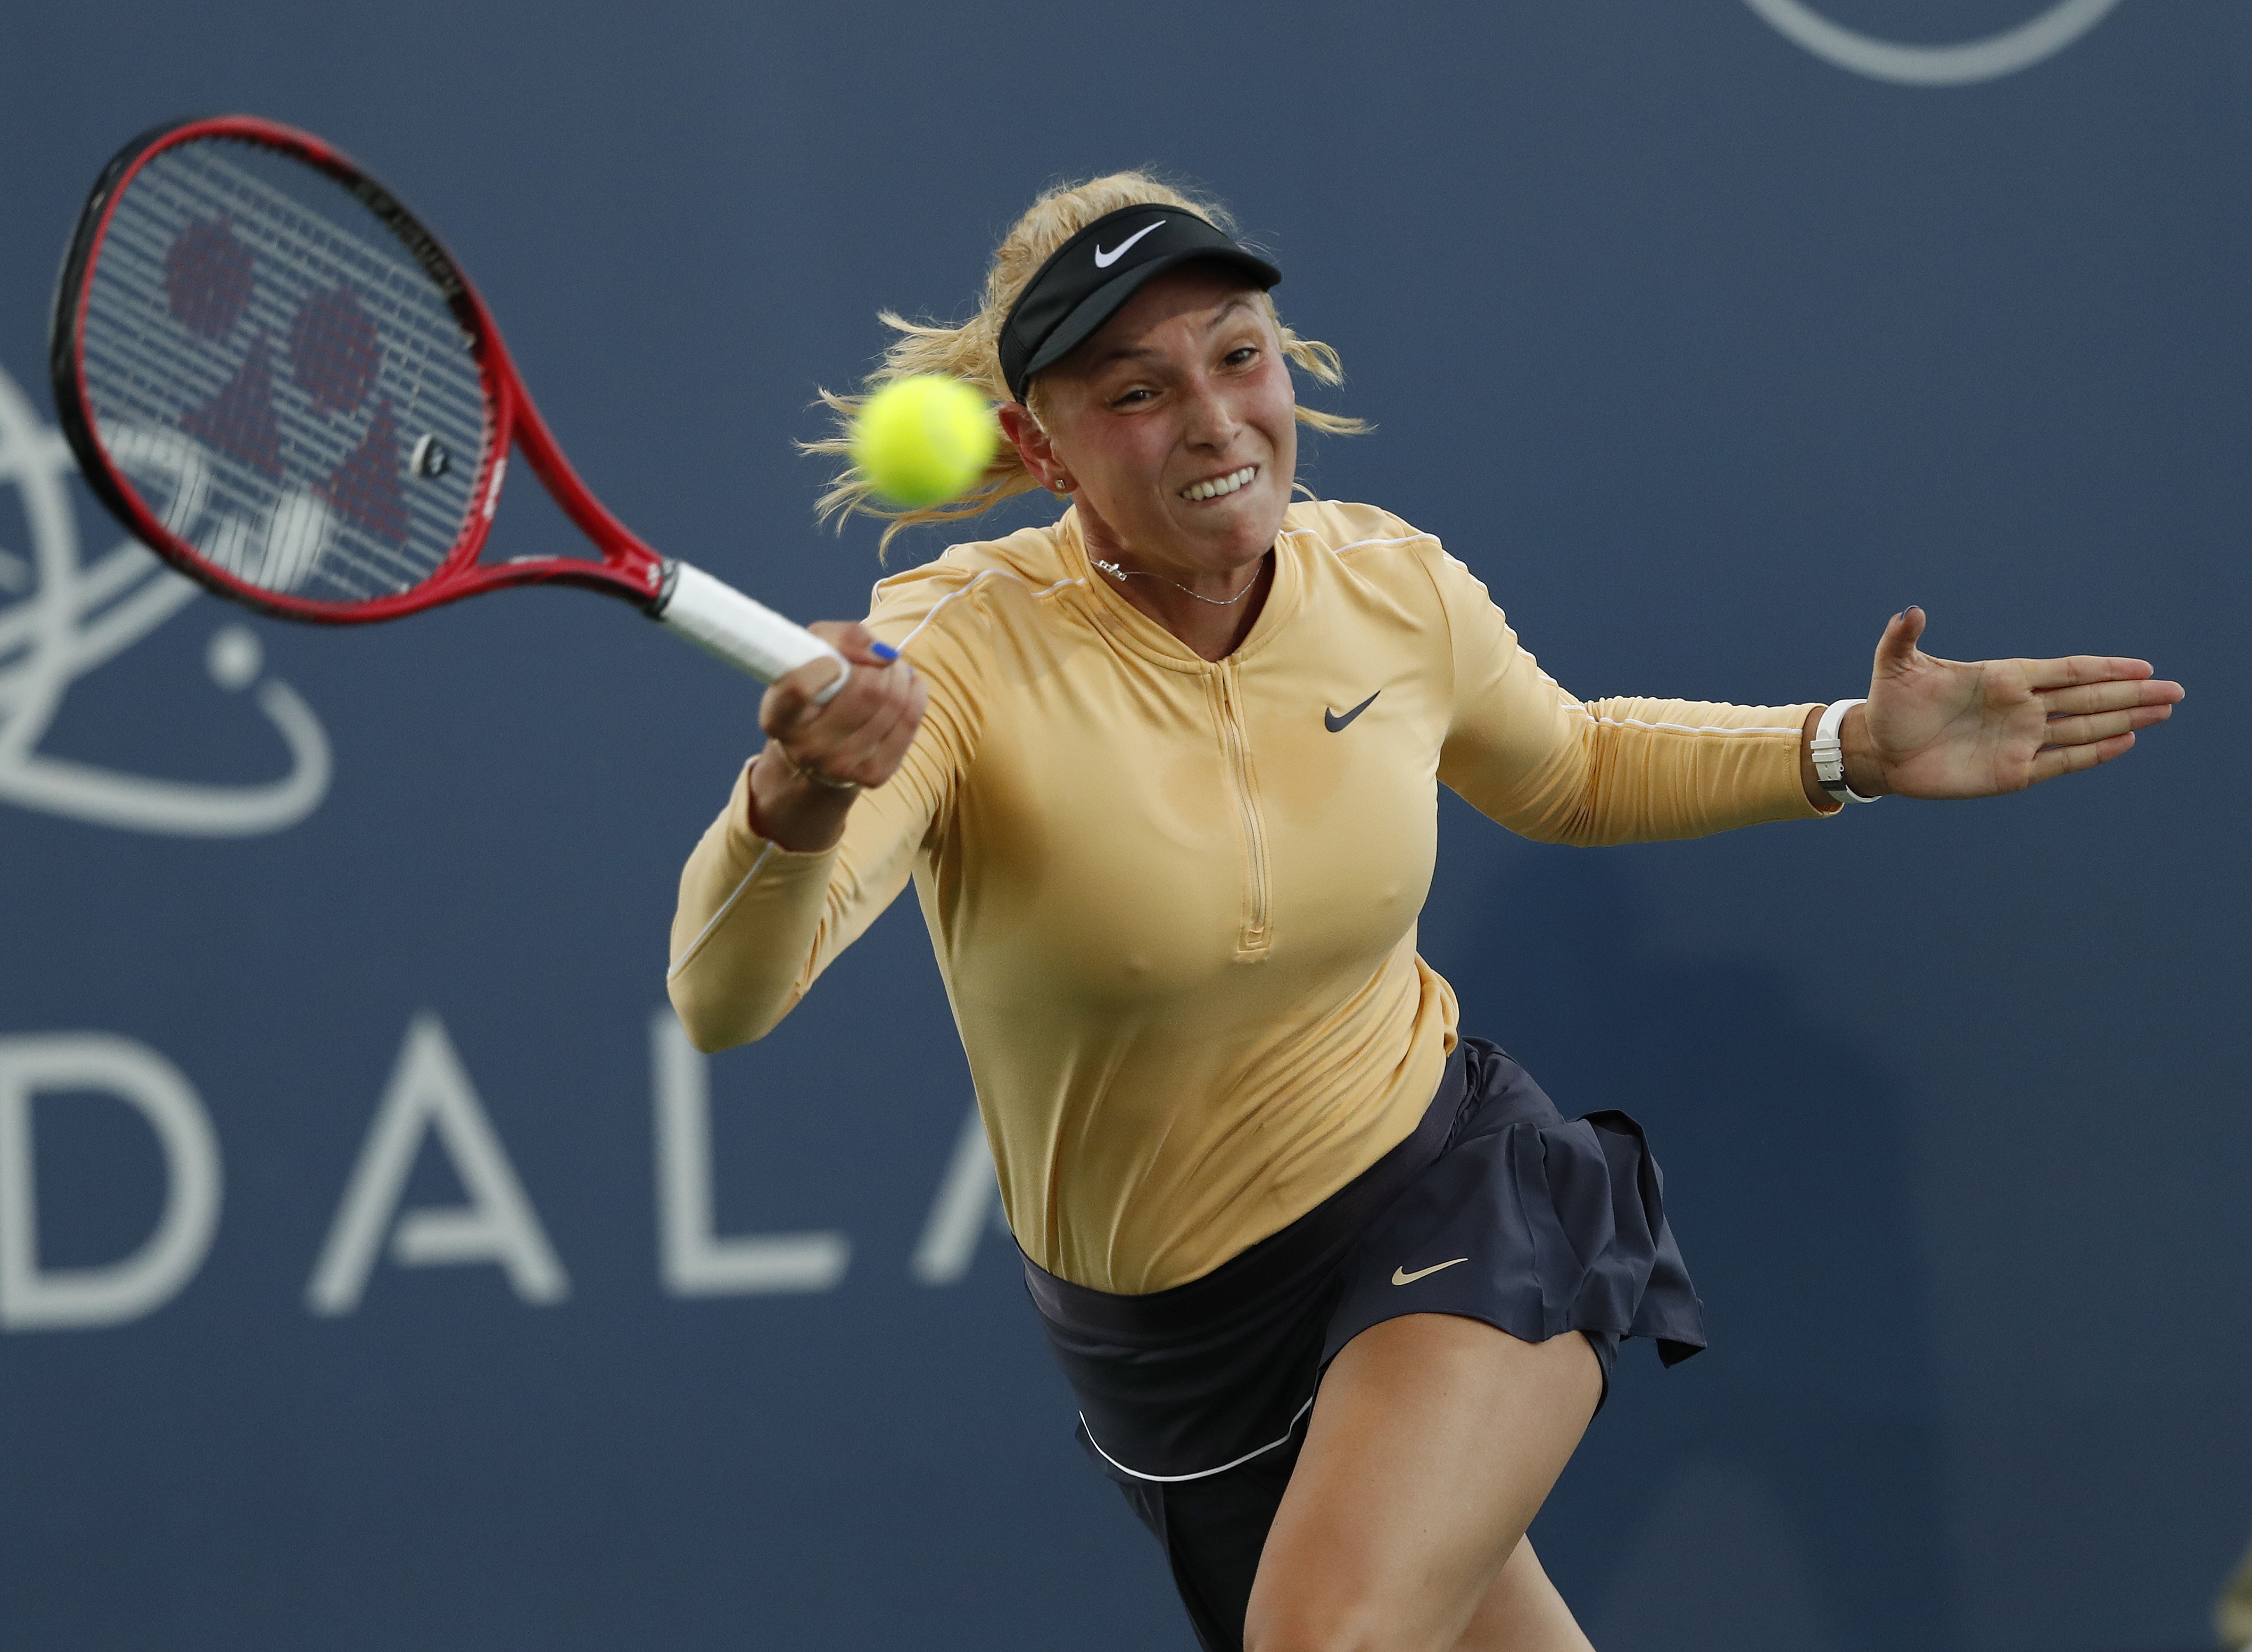 epa07752831 Donna Vekic of Croatia in action against Victoria Azarenka of Belarus during the Silicon Valley Classic tennis tournament at San Jose State University in San Jose, California, USA, 01 August 2019.  EPA/JOHN G. MABANGLO